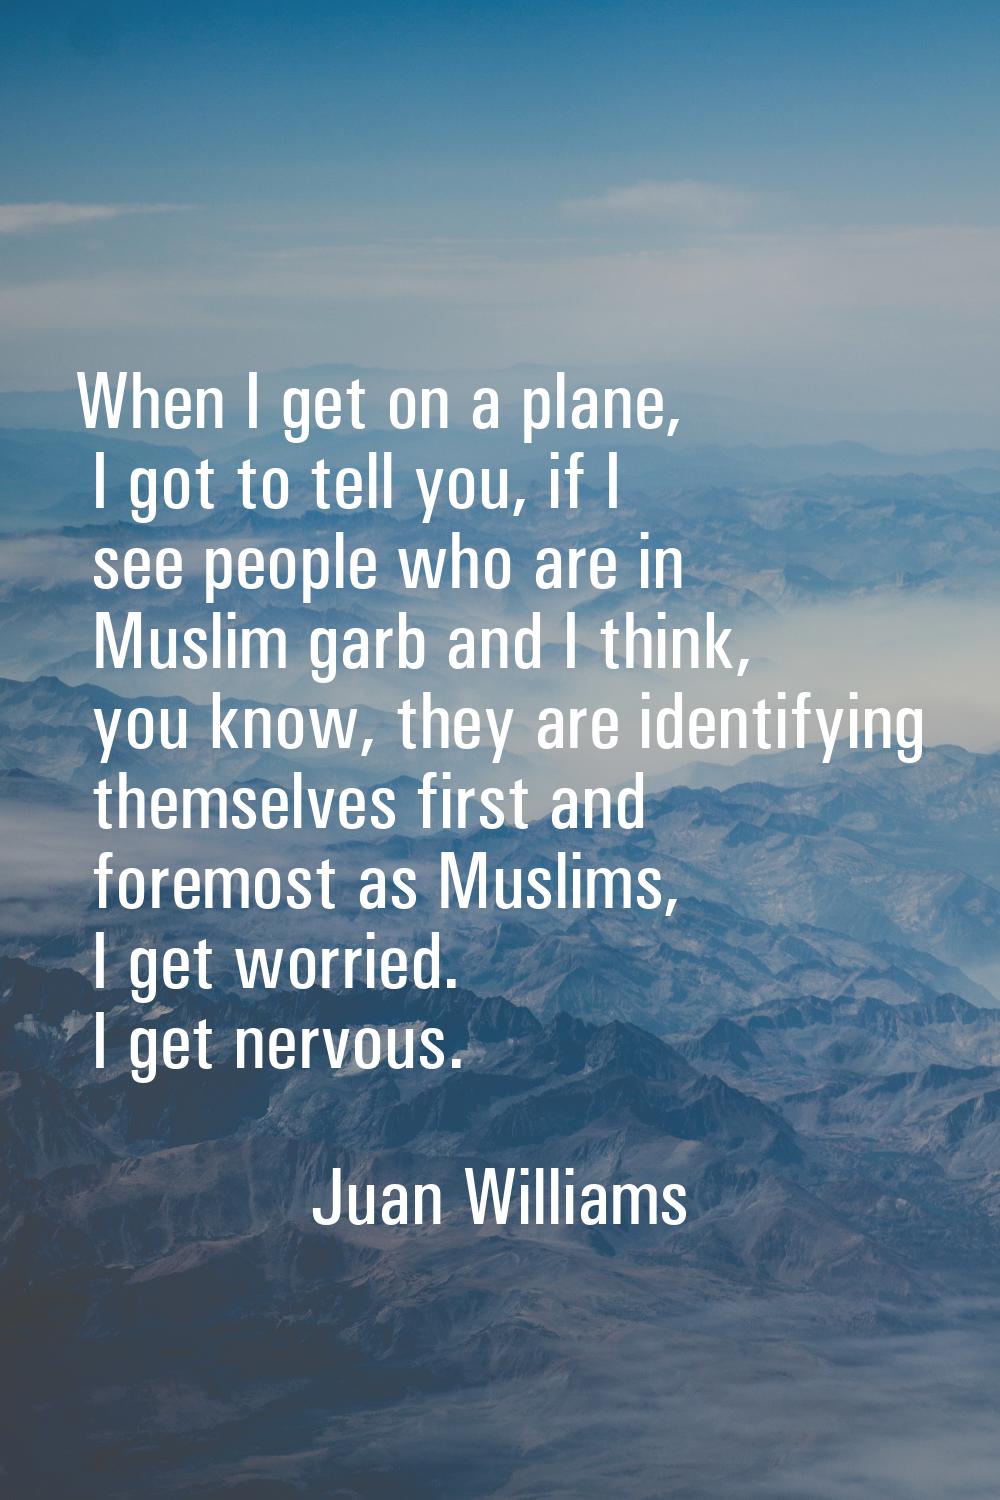 When I get on a plane, I got to tell you, if I see people who are in Muslim garb and I think, you k